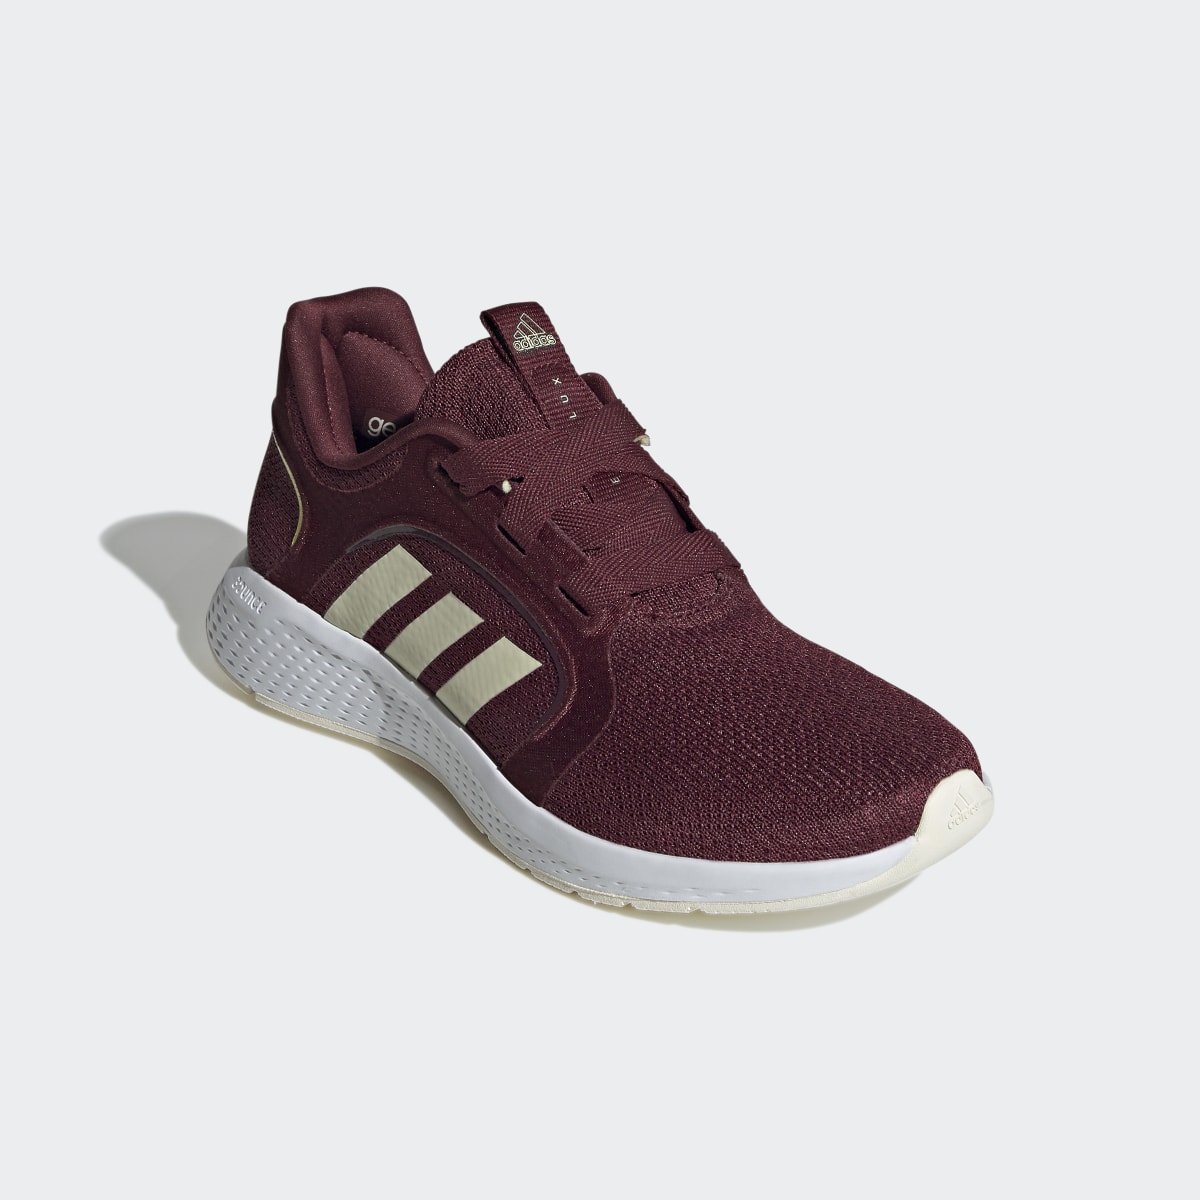 Adidas Edge Lux Shoes. 5